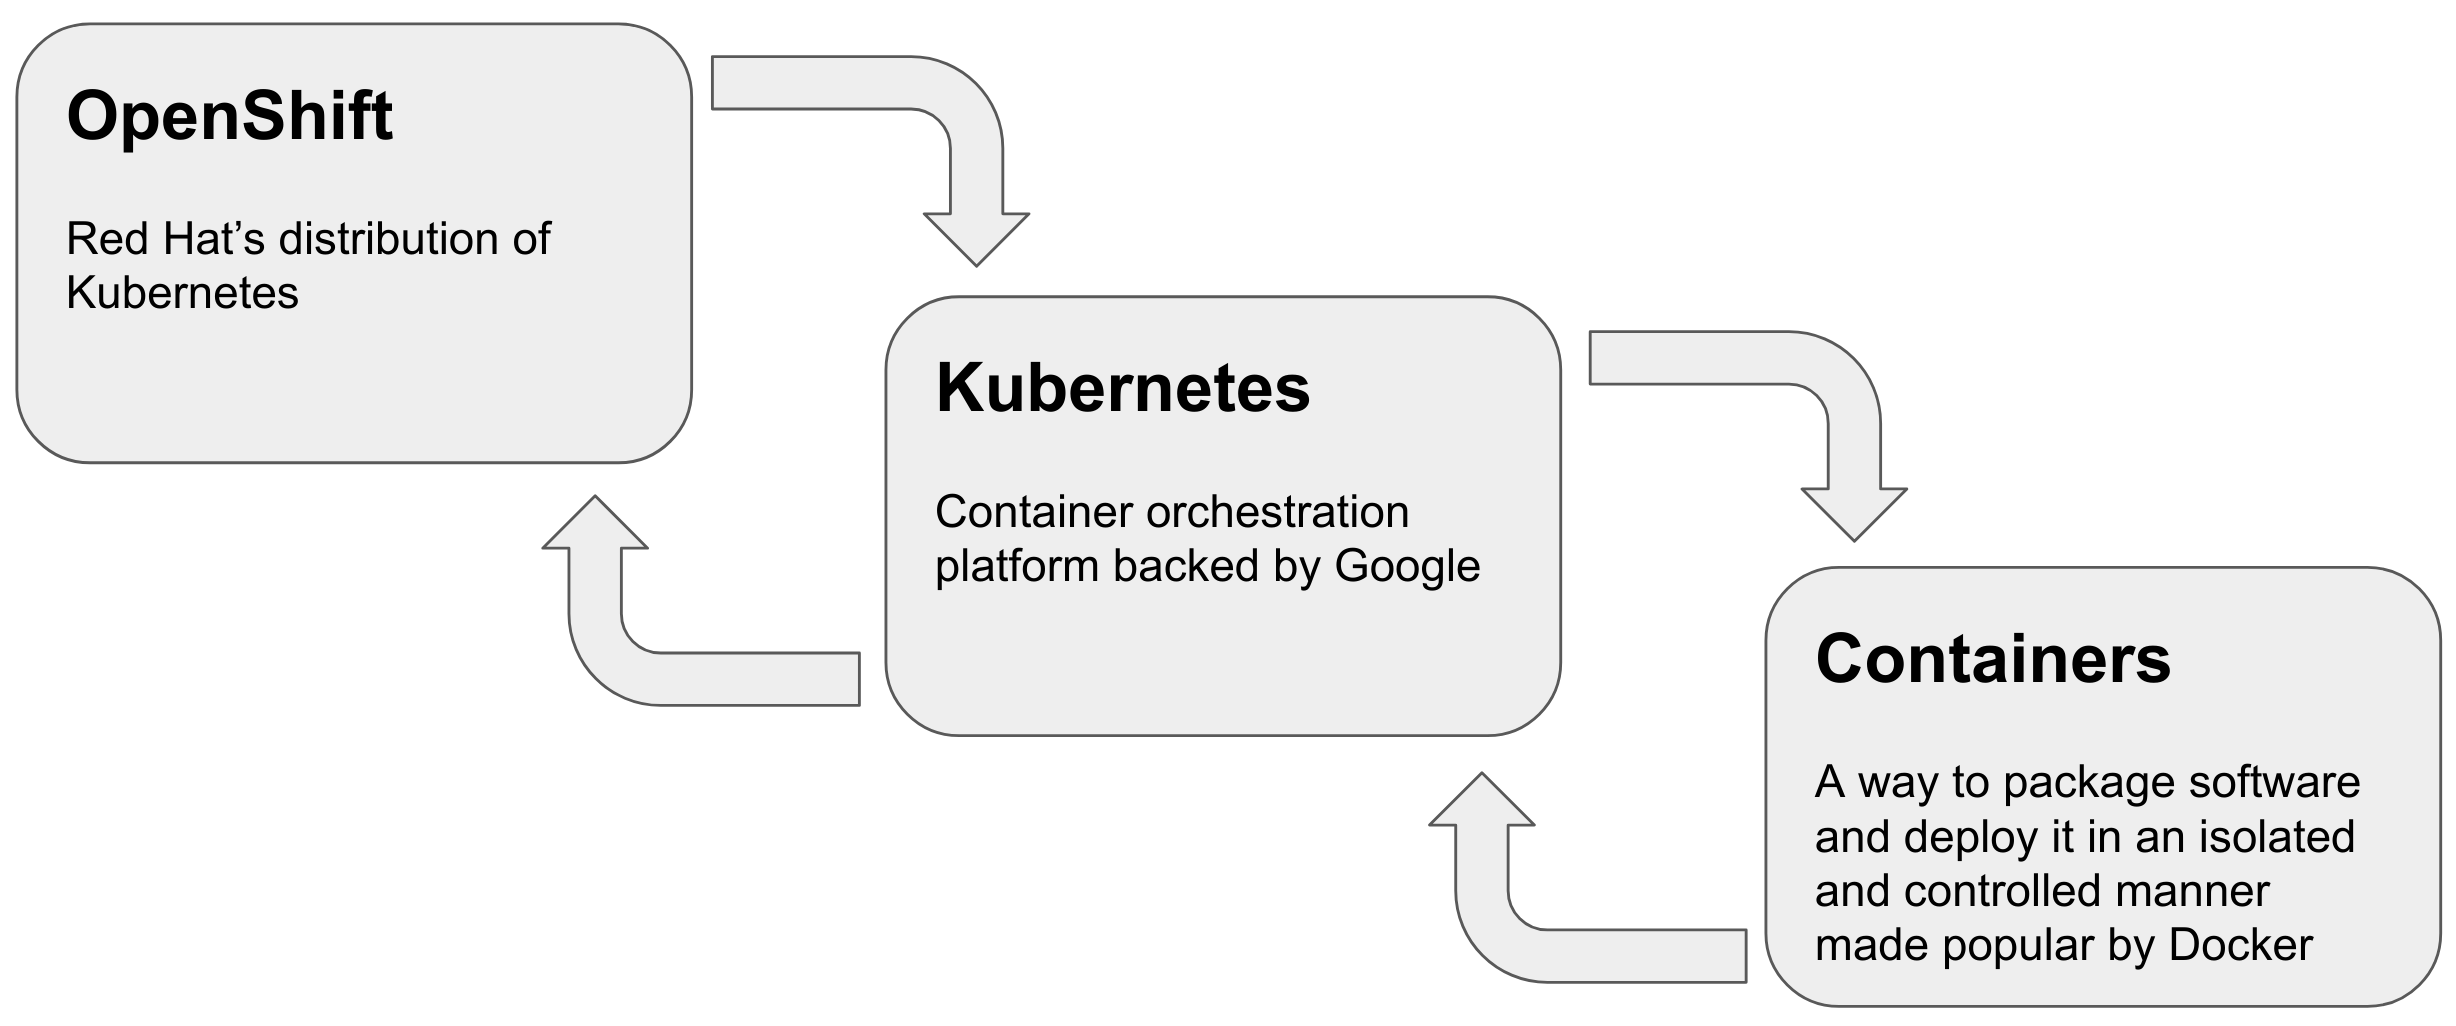 openshift-k8s-containers